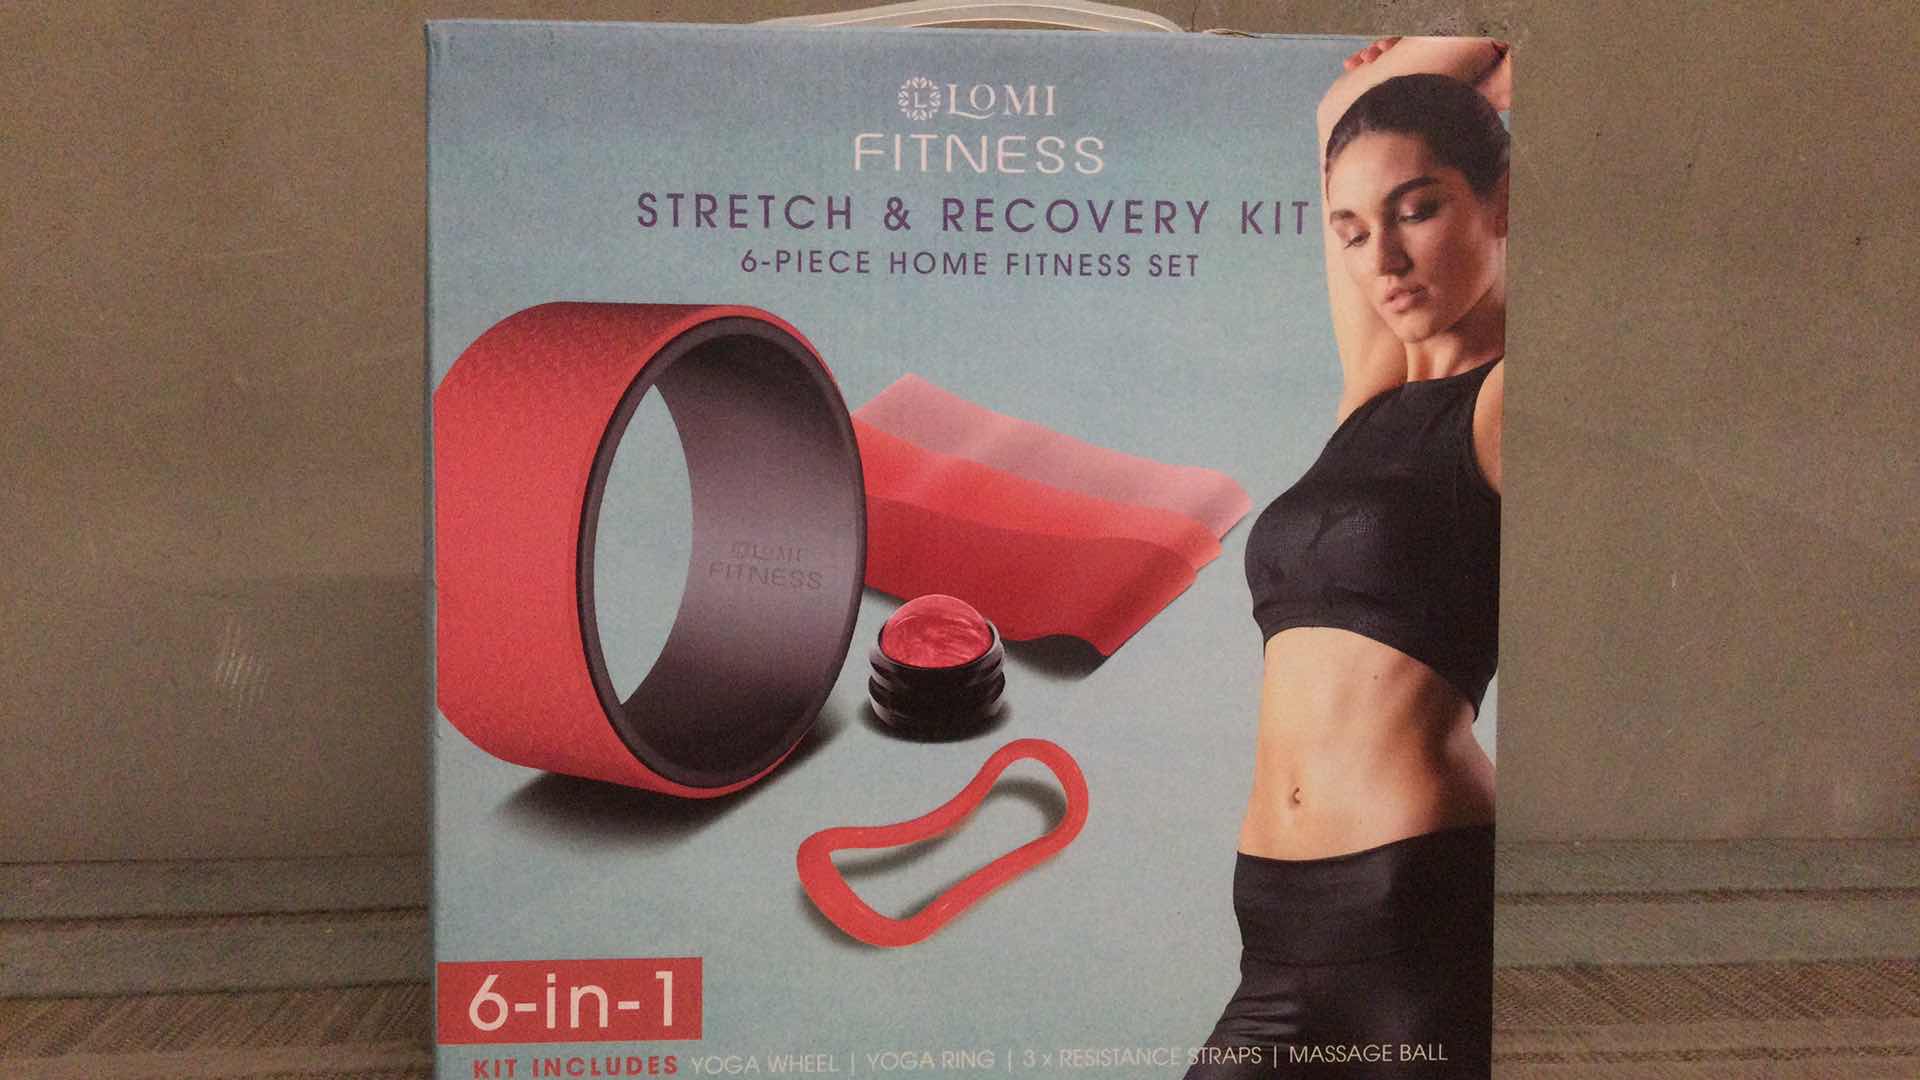 Photo 1 of NEW LOMI FITNESS STRETCH & RECOVERY KIT 6-PIECE HOME FITNESS SET